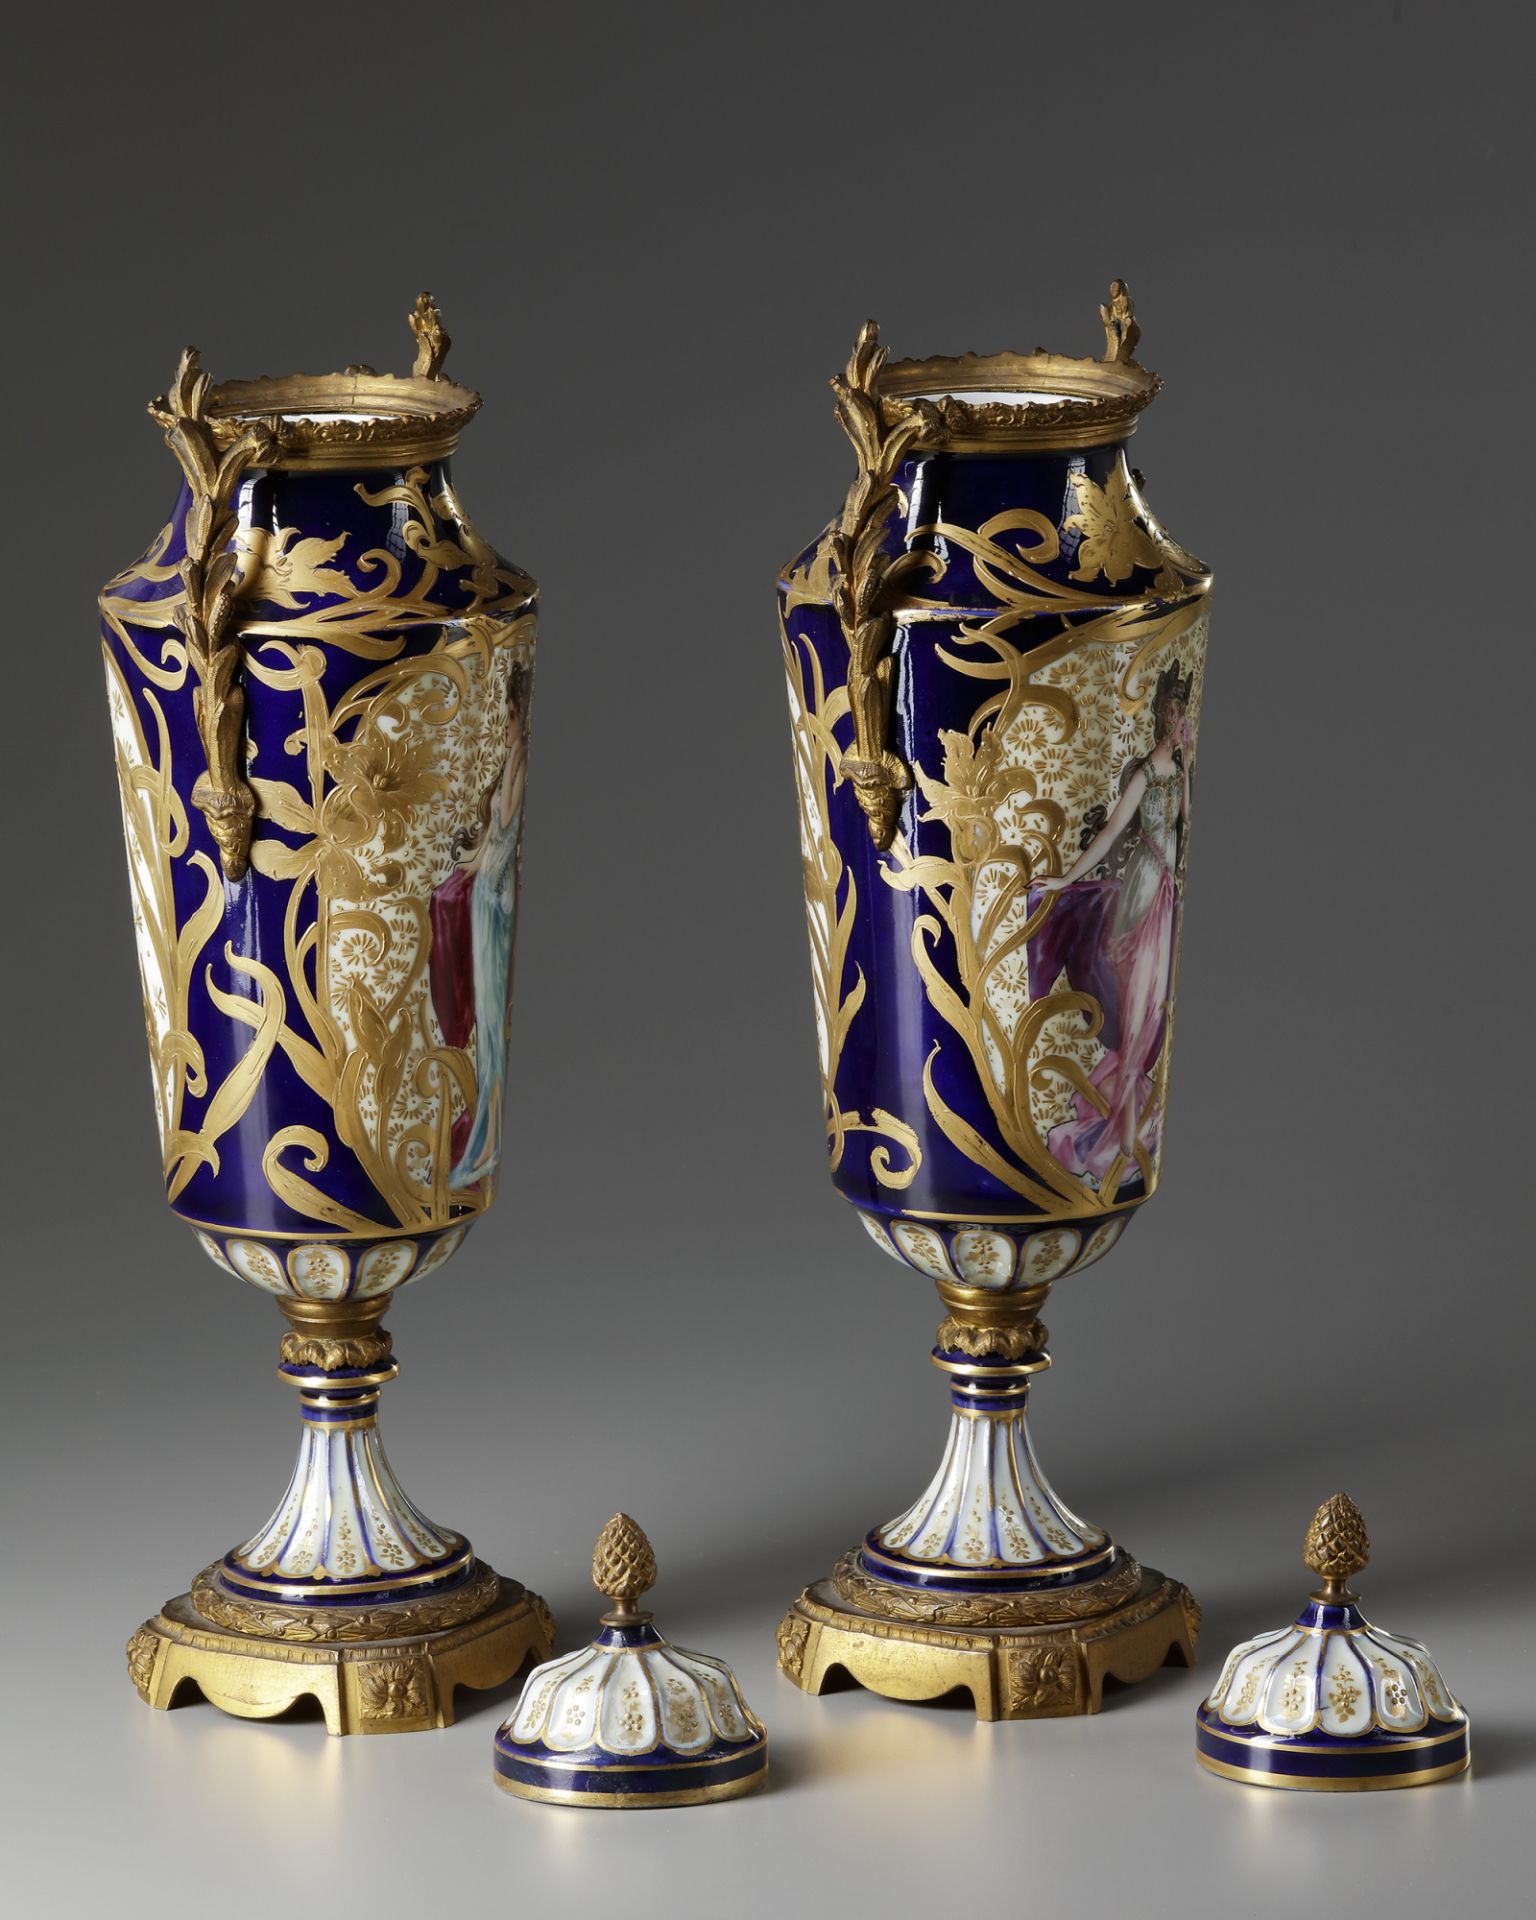 A PAIR OF ART NOUVEAU STYLE VASES, LATE 19TH CENTURY - Image 4 of 4